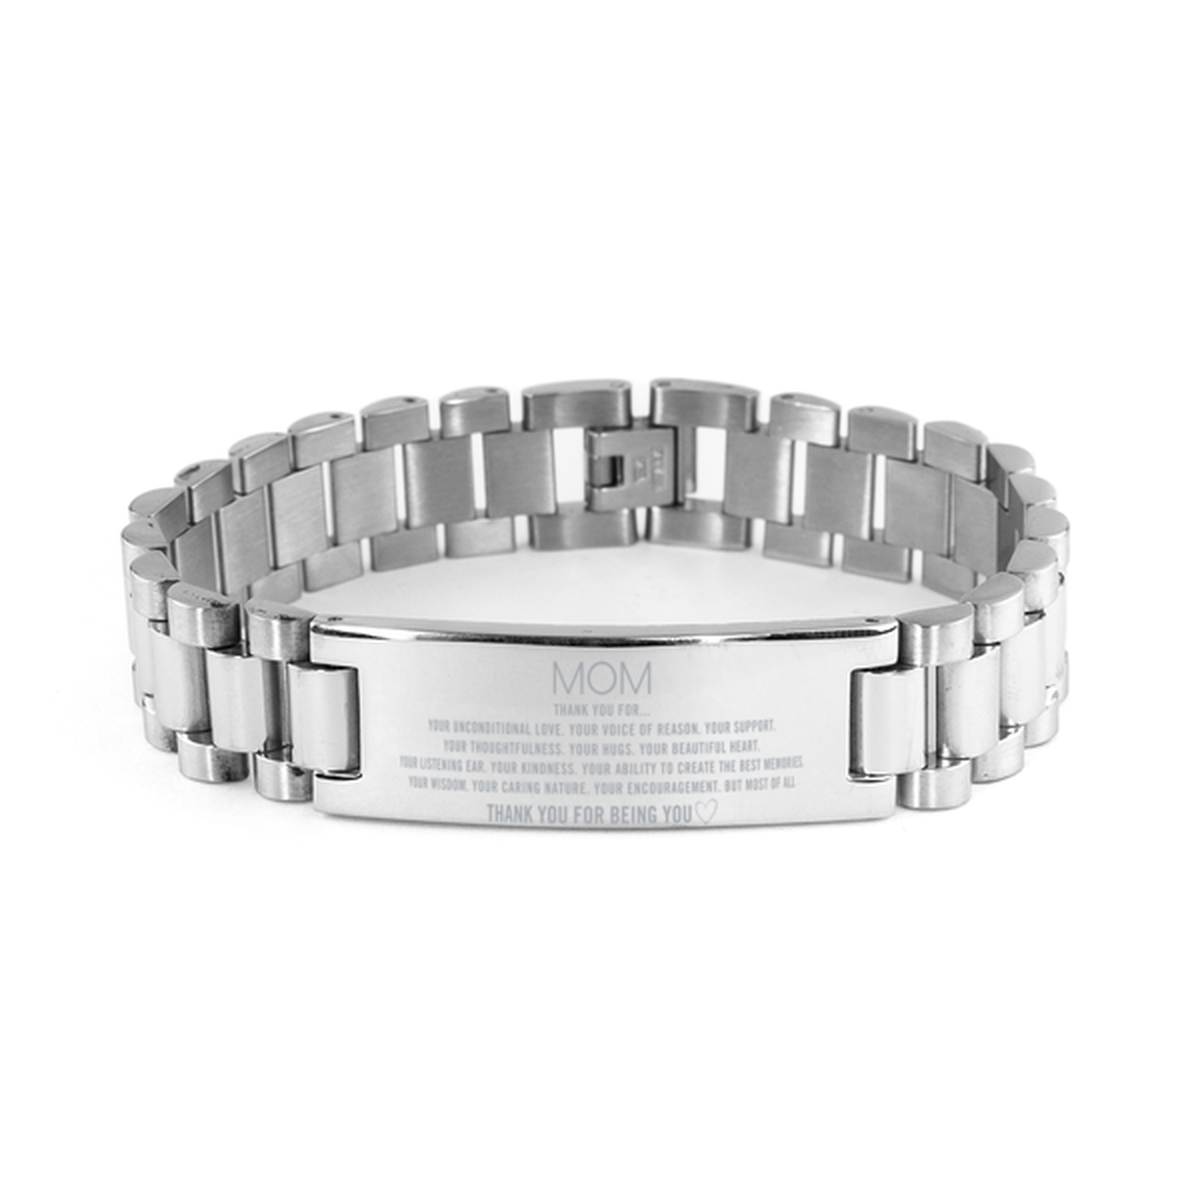 Mom Ladder Stainless Steel Bracelet Custom, Engraved Gifts For Mom Christmas Graduation Birthday Gifts for Men Women Mom Thank you for Your unconditional love